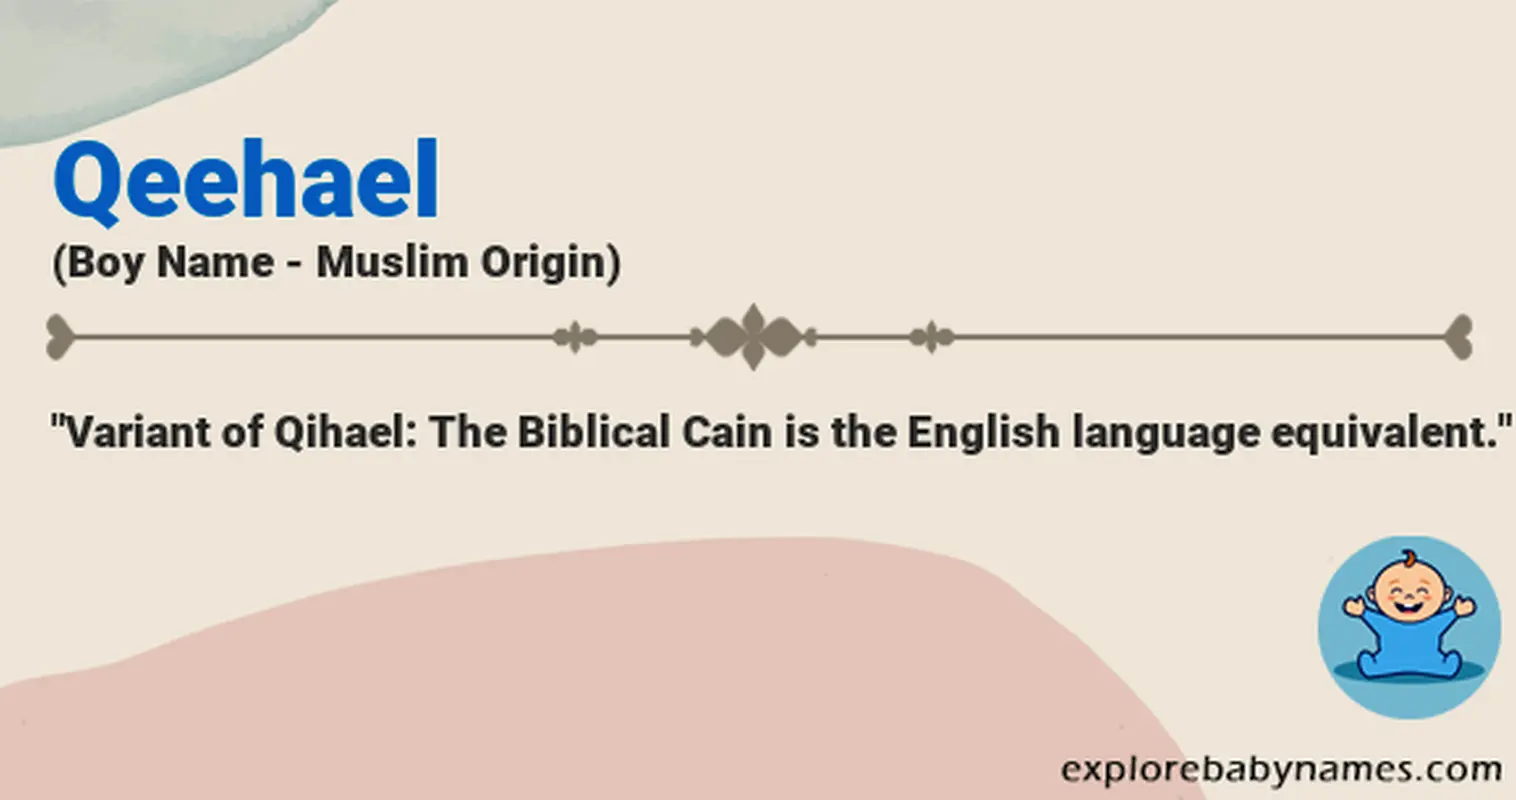 Meaning of Qeehael